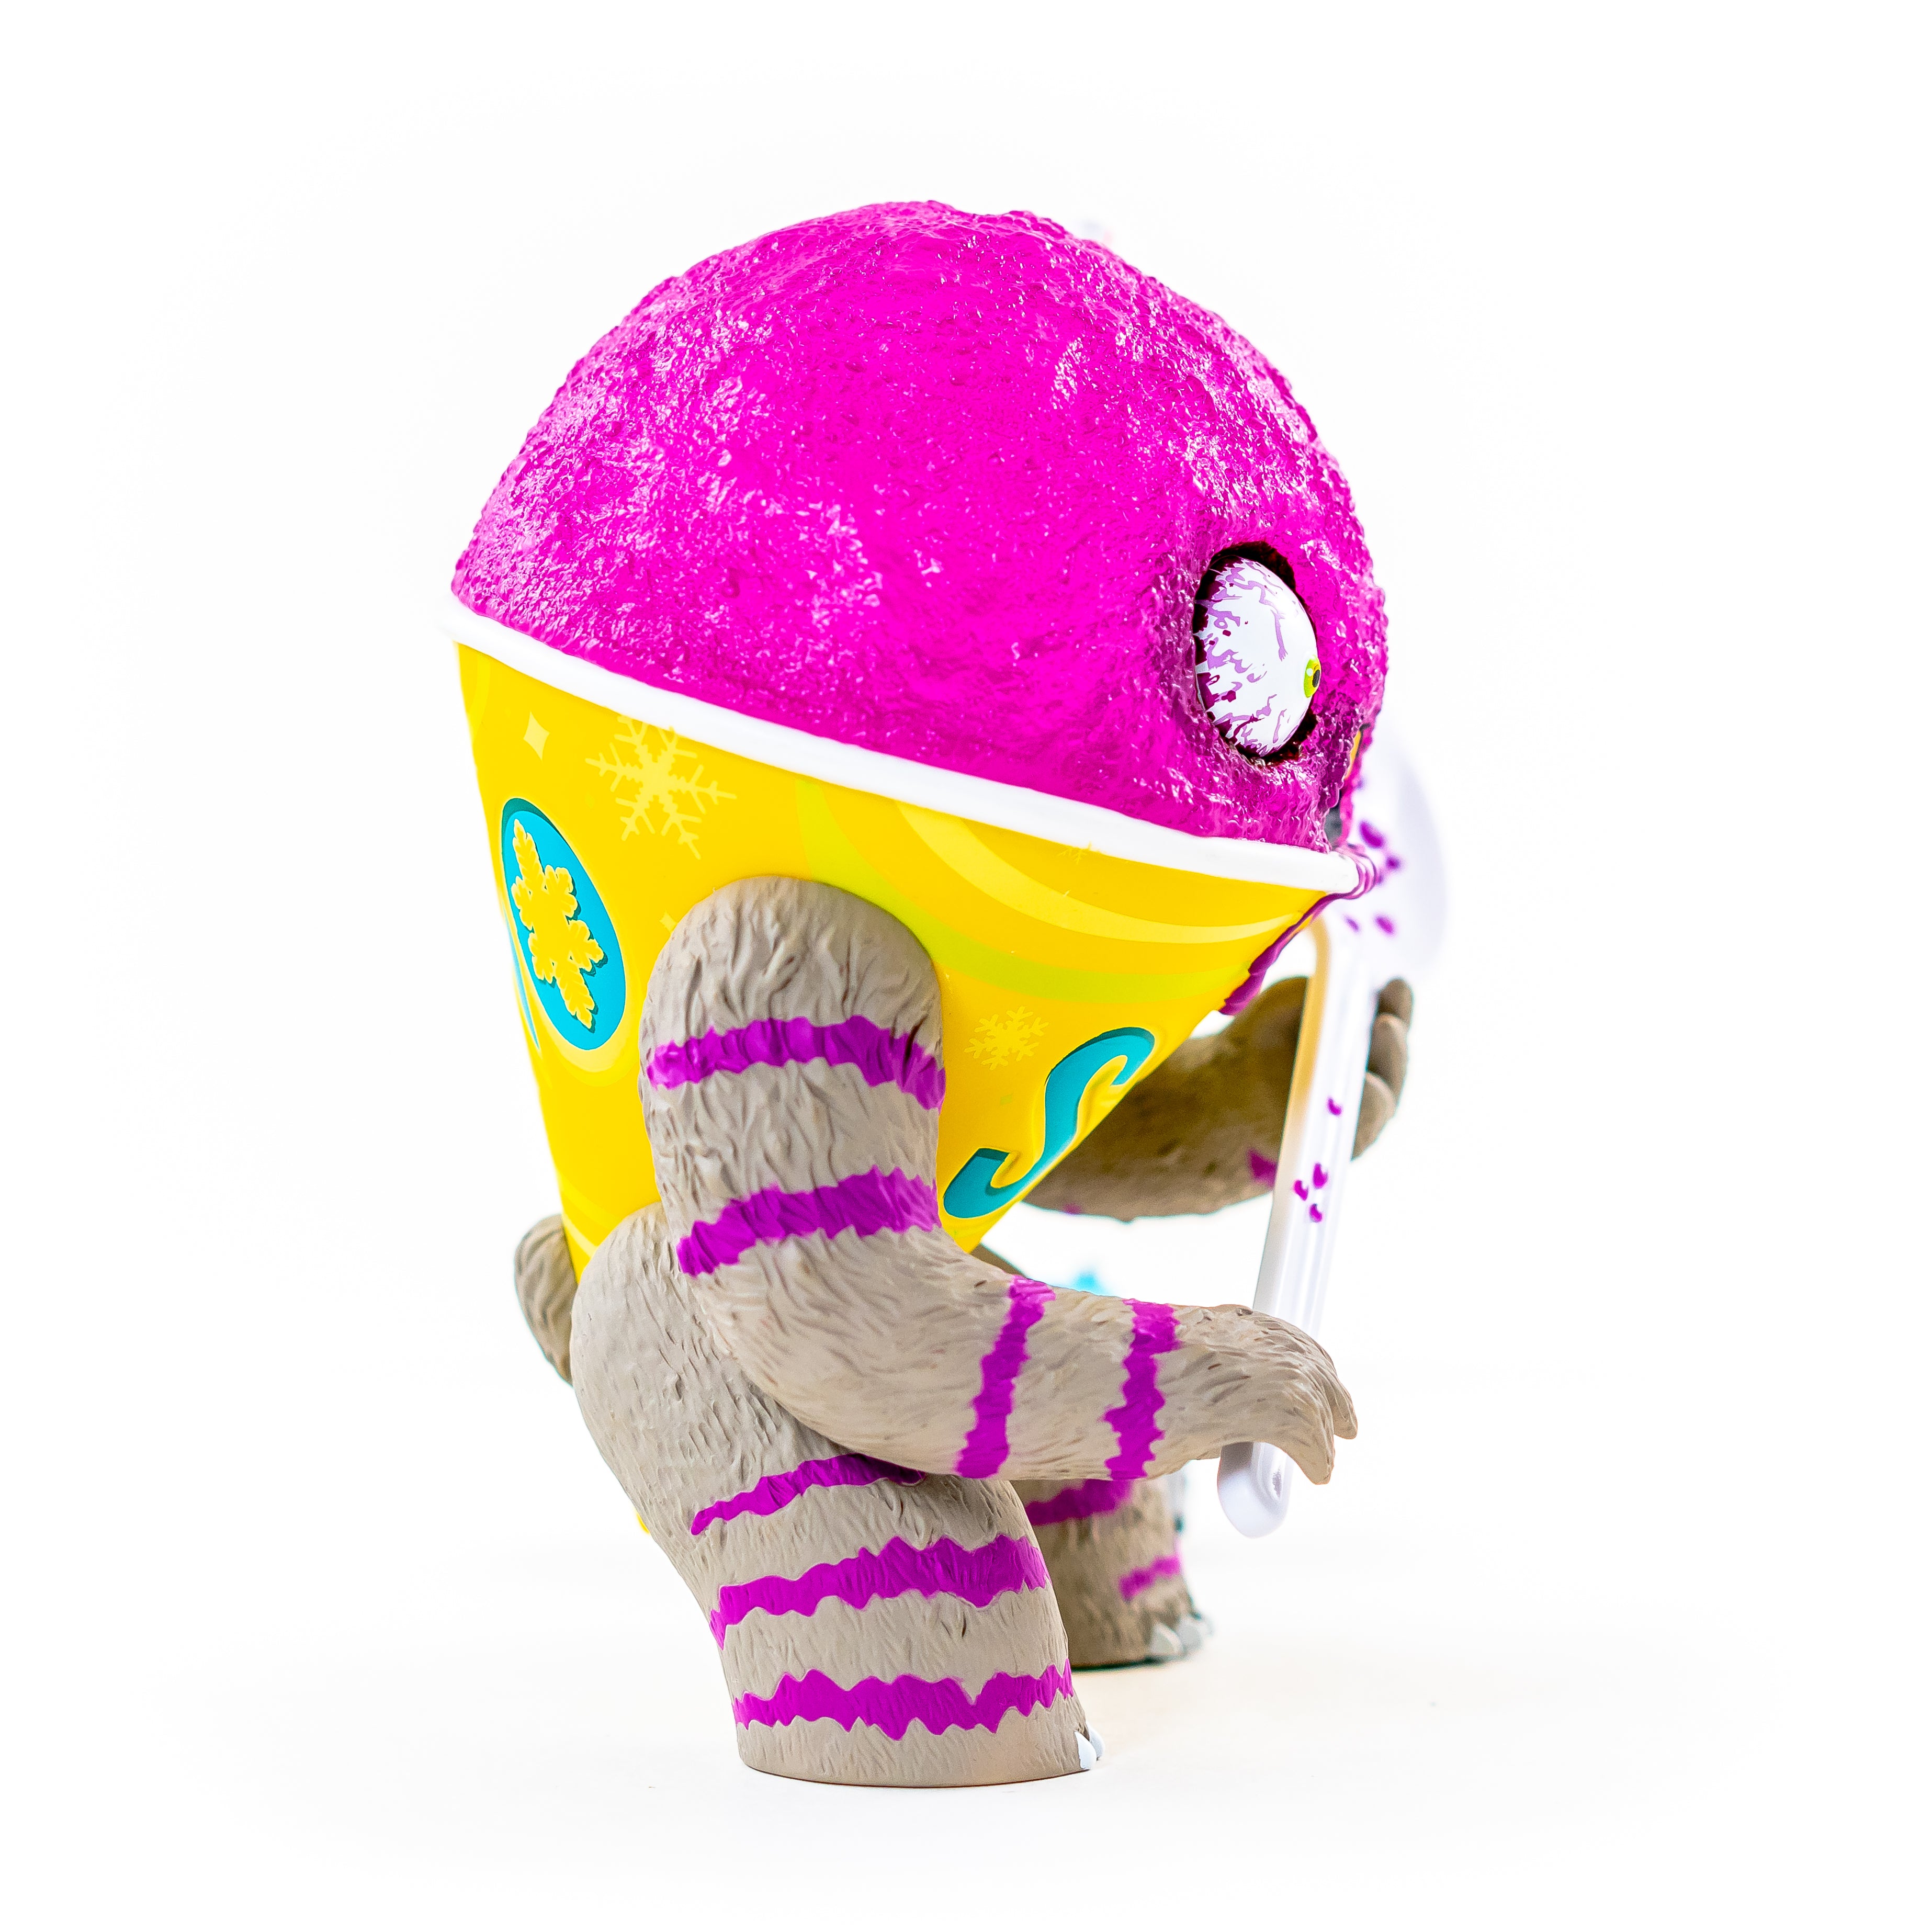 The Abominable Snow Cone Grape Edition by Jason Limon x Martian Toys